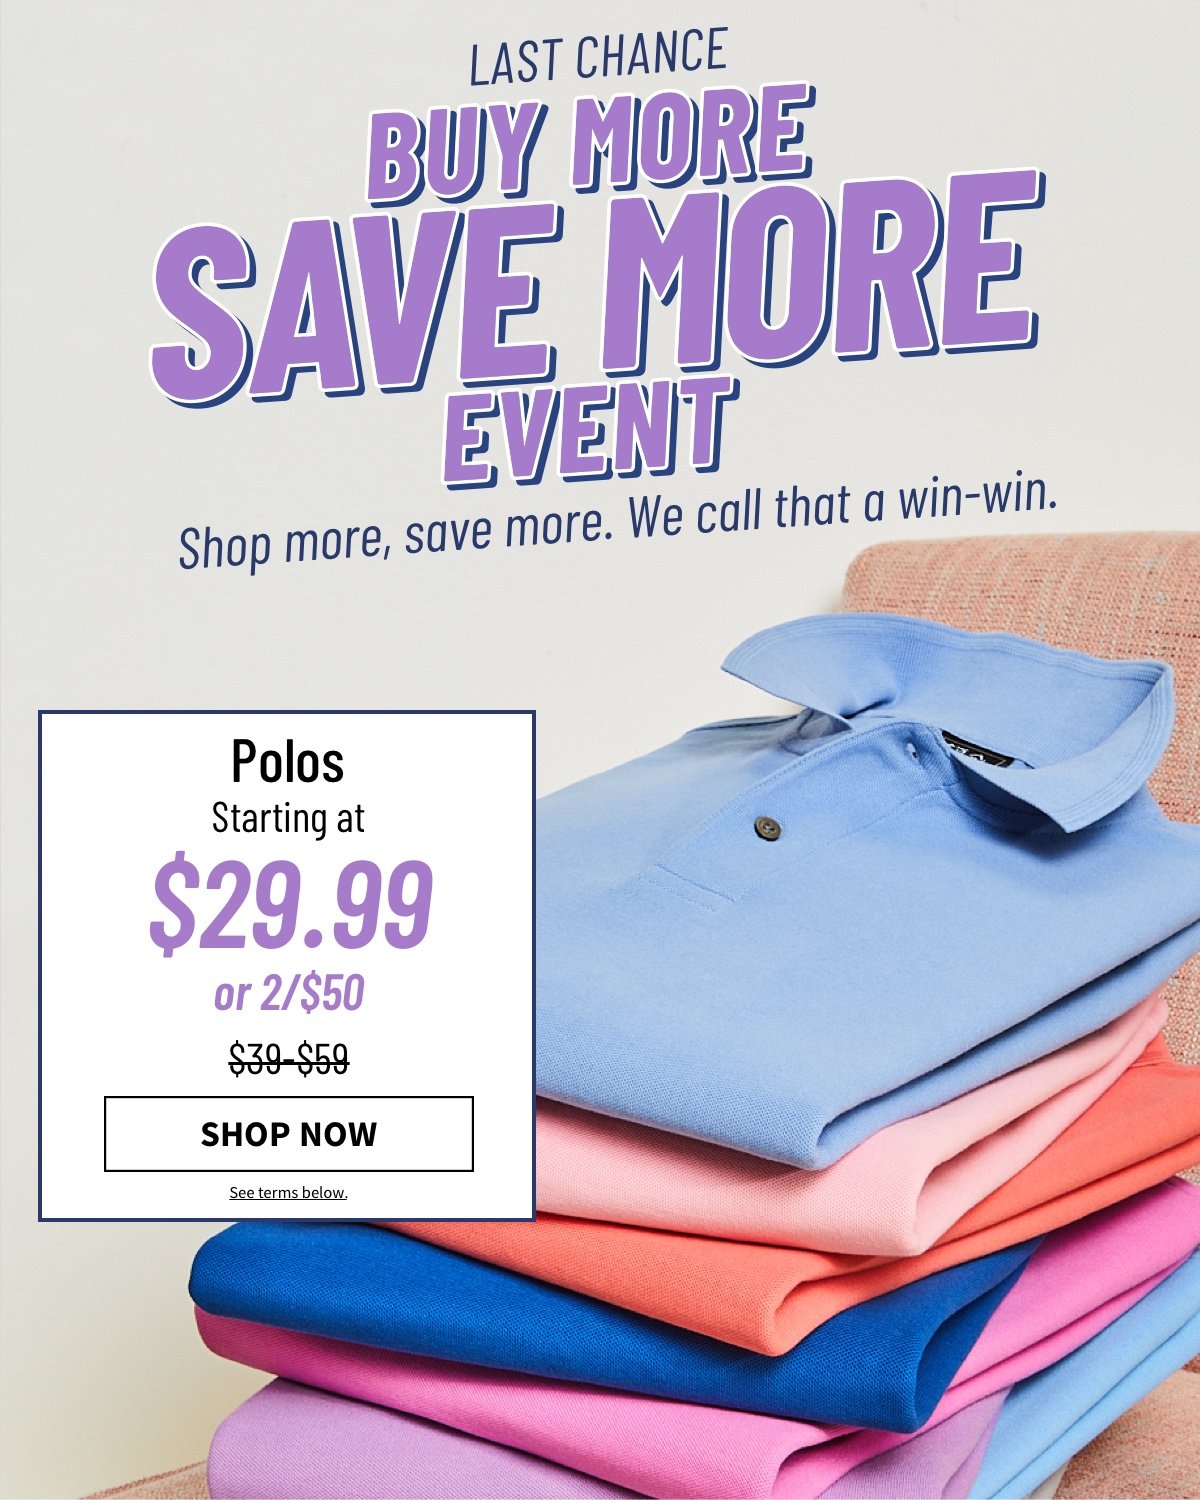 It s your last chance to shop our Buy More Save More event for savings that are a win-win